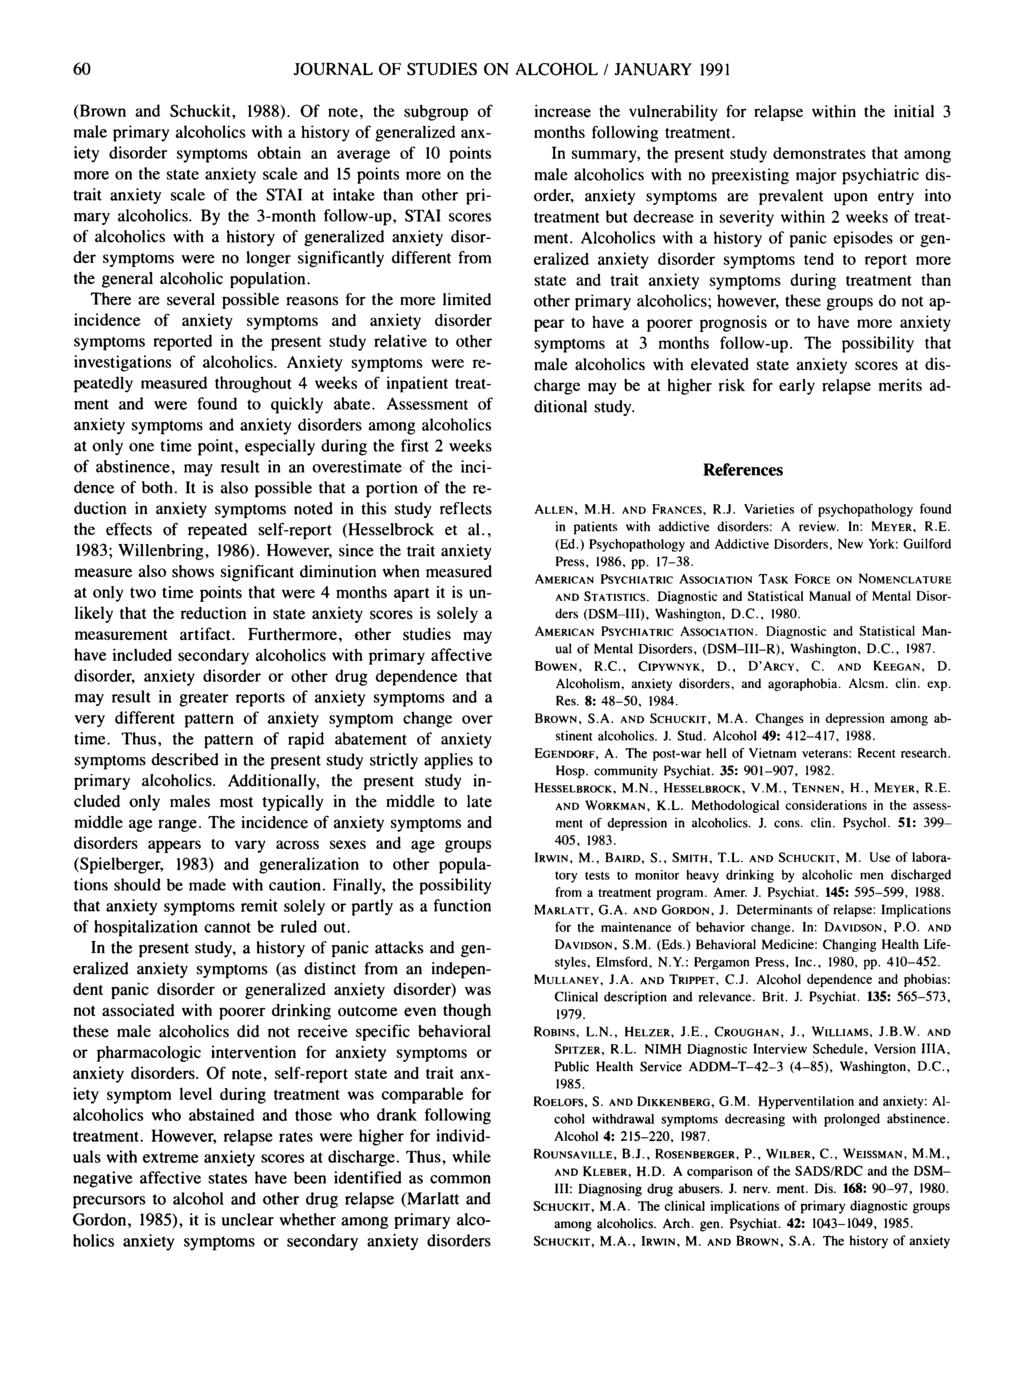 60 JOURNAL OF STUDIES ON ALCOHOL / JANUARY 1991 (Brown and Schuckit, 1988).